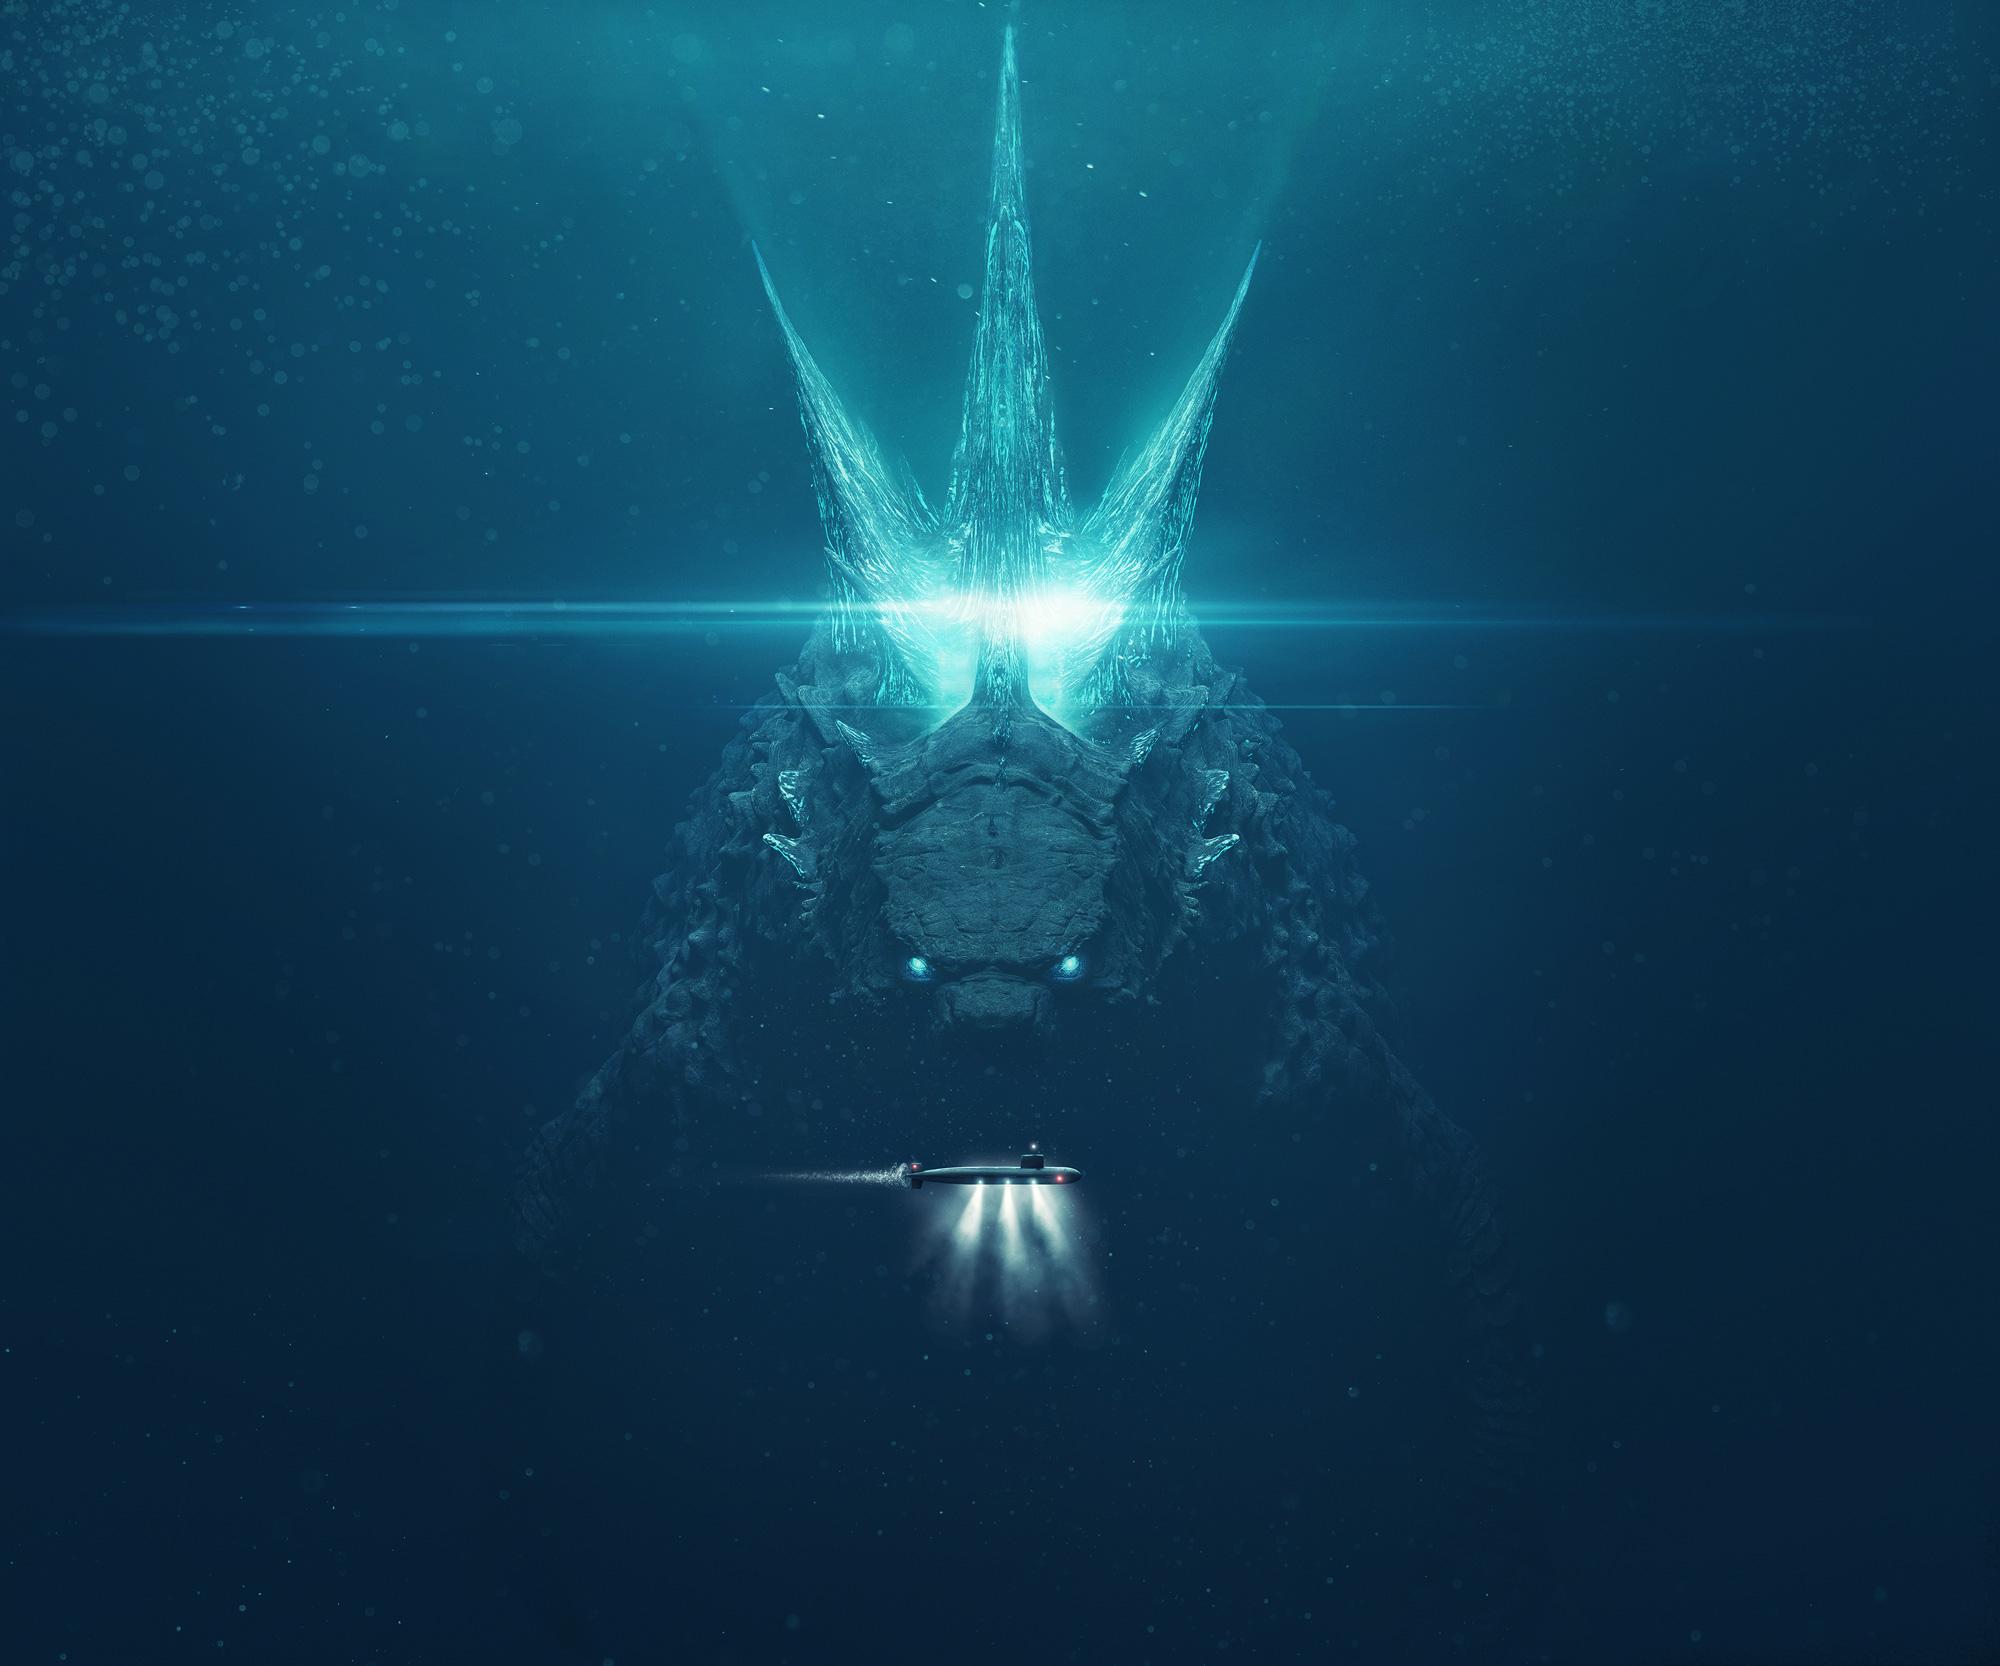 Godzilla King of the Monsters 2019 Poster Wallpaper, HD Movies 4K